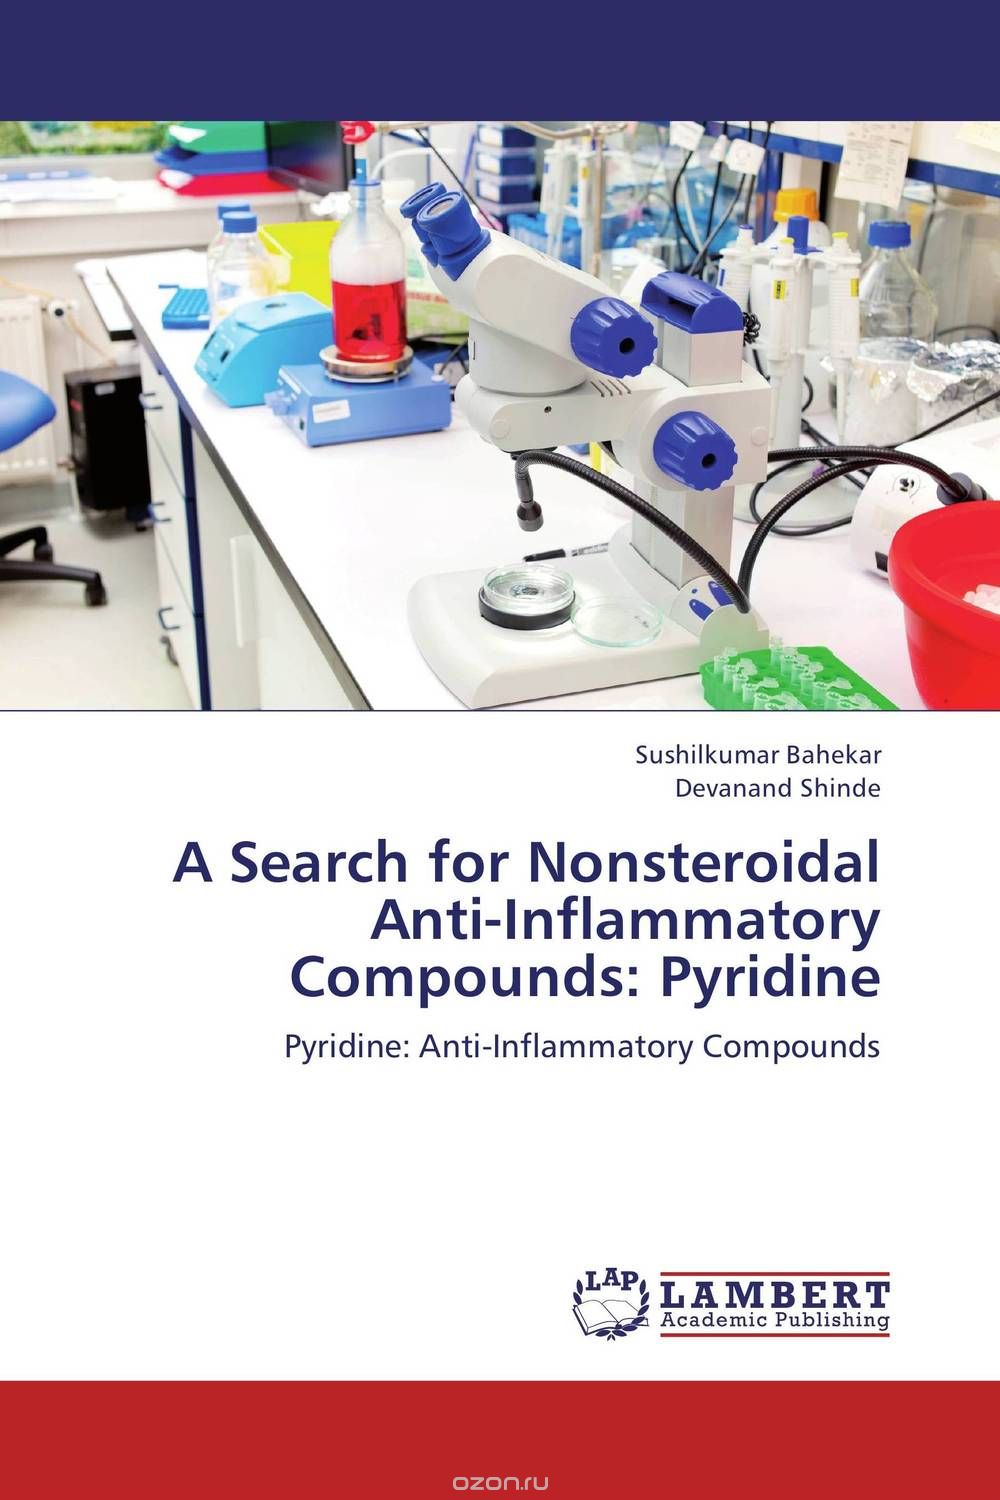 Скачать книгу "A Search for Nonsteroidal  Anti-Inflammatory Compounds: Pyridine"